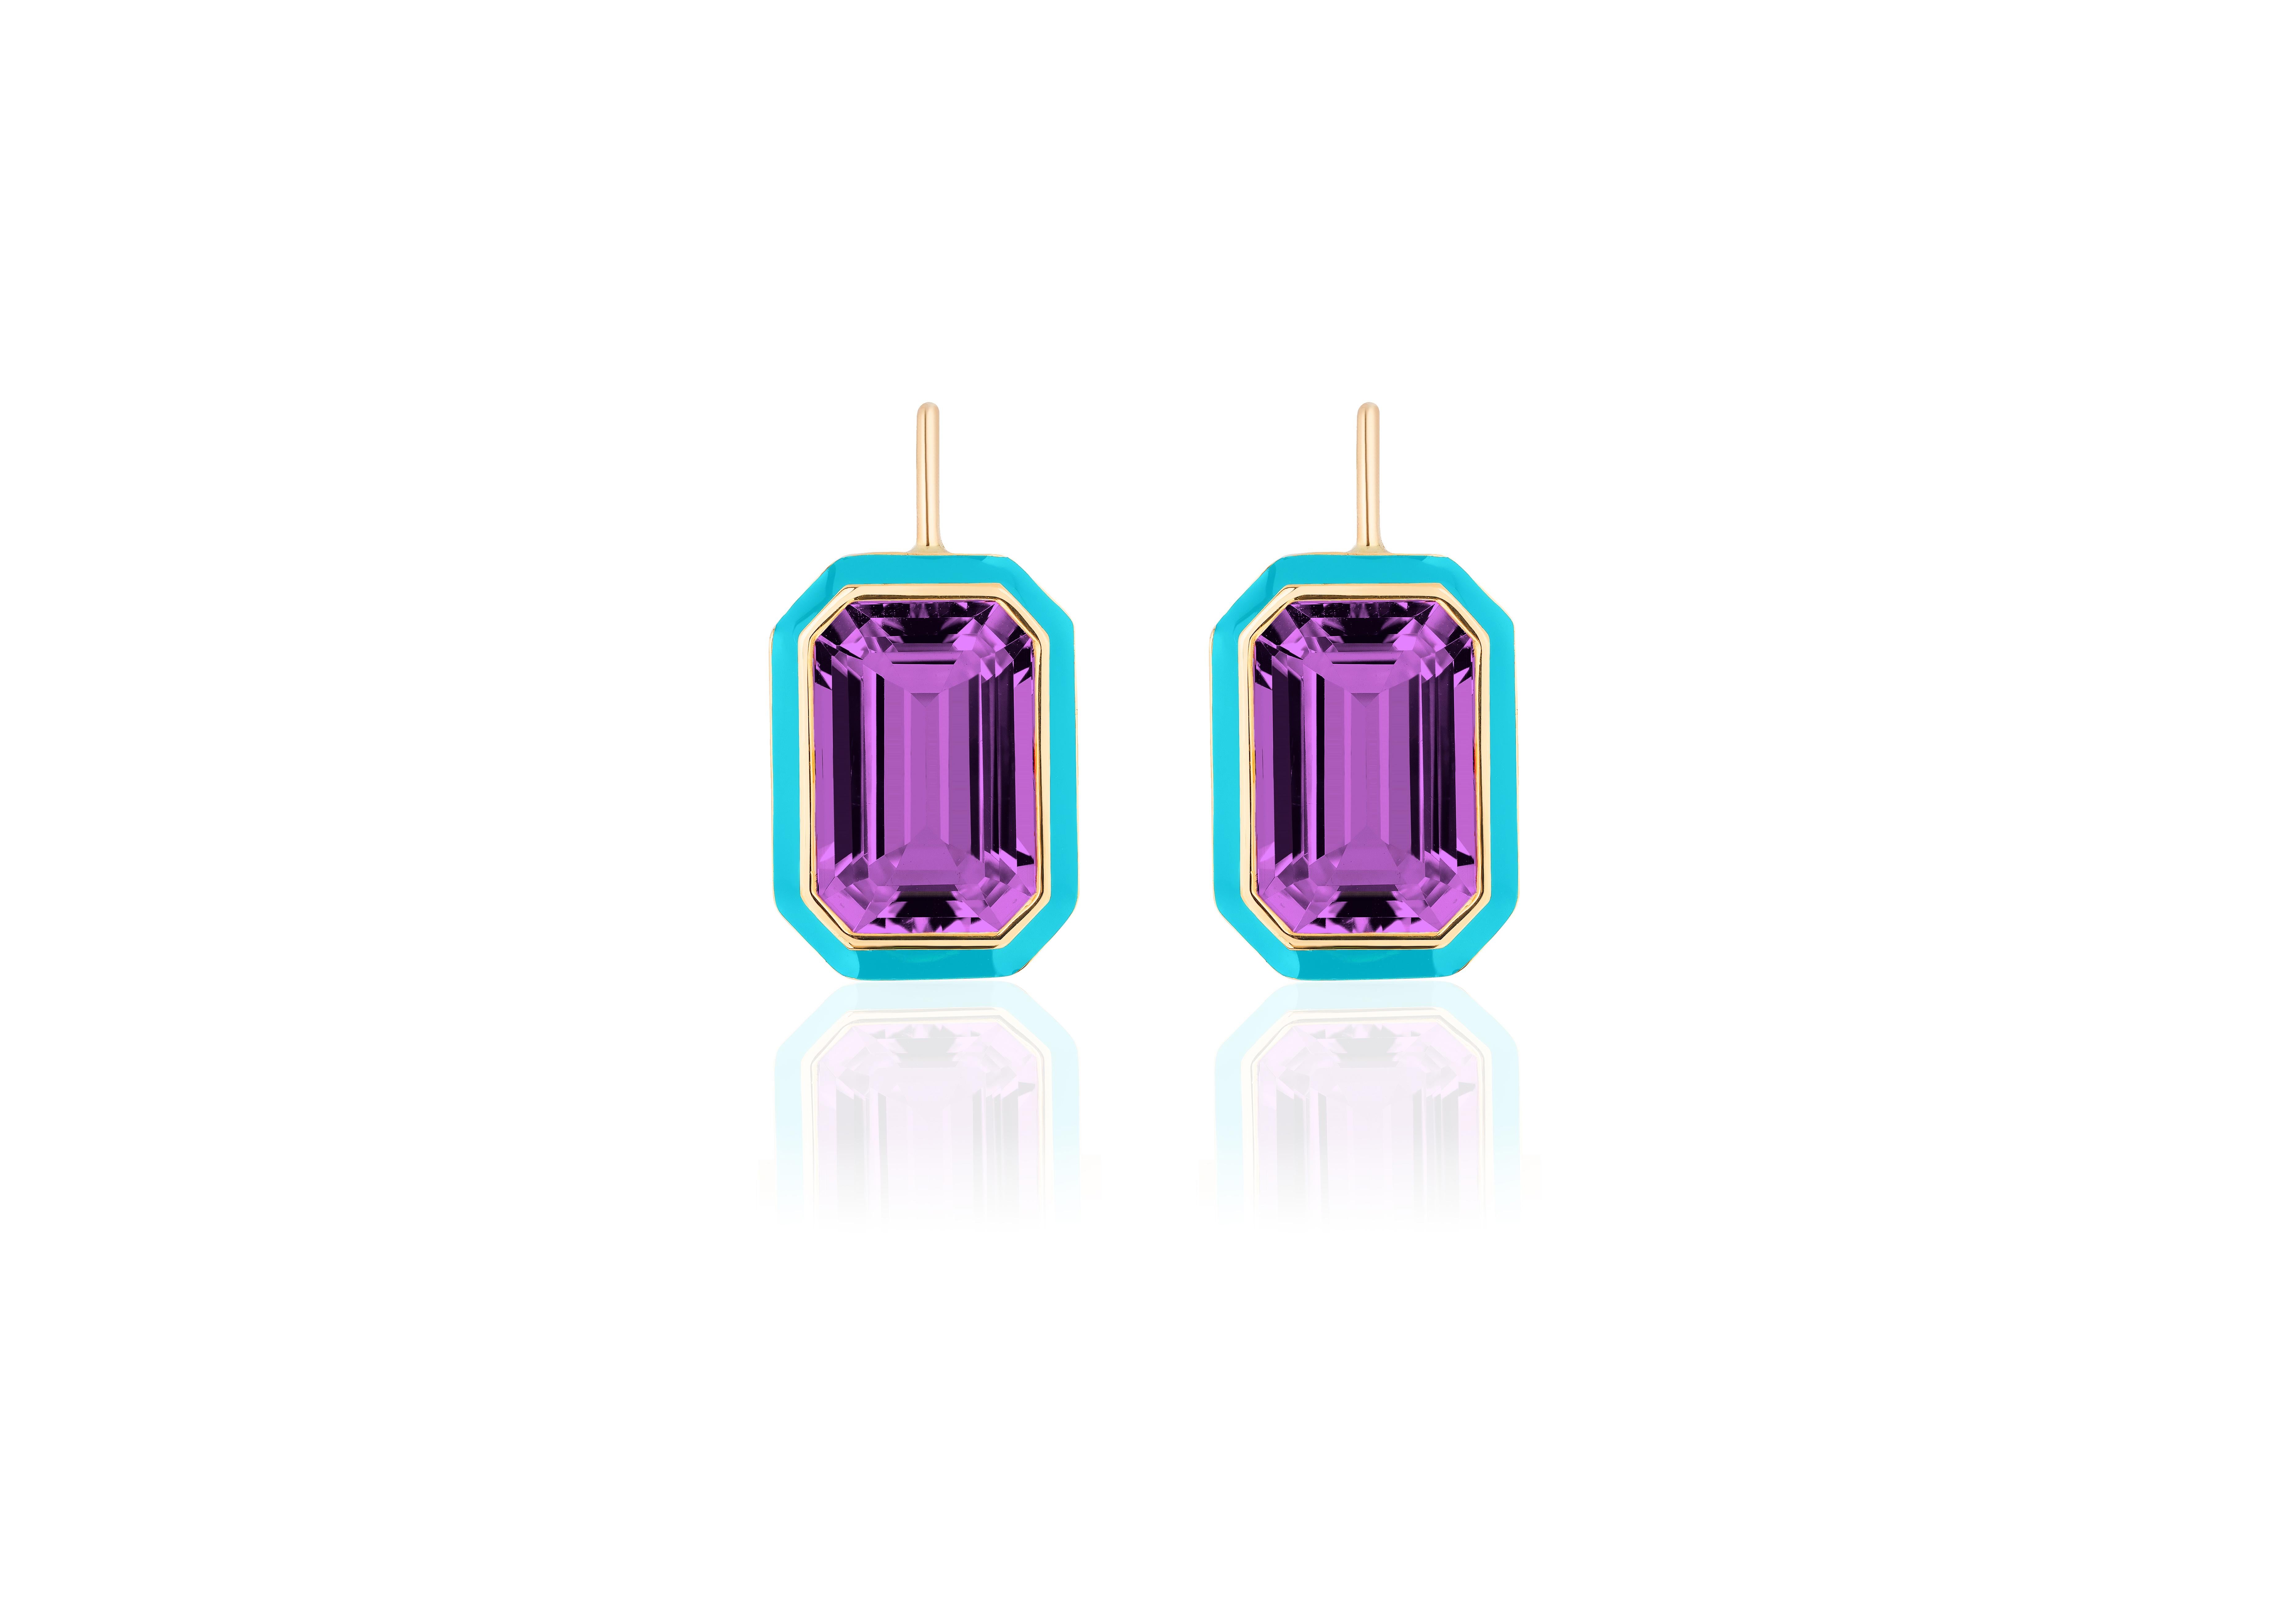 These beautiful earrings are an Emerald Cut Amethyst, with Turquoise Enamel border on wire. From our ‘Queen’ Collection, it was inspired by royalty, but with a modern twist. The combination of enamel, and Amethyst represents power, richness and